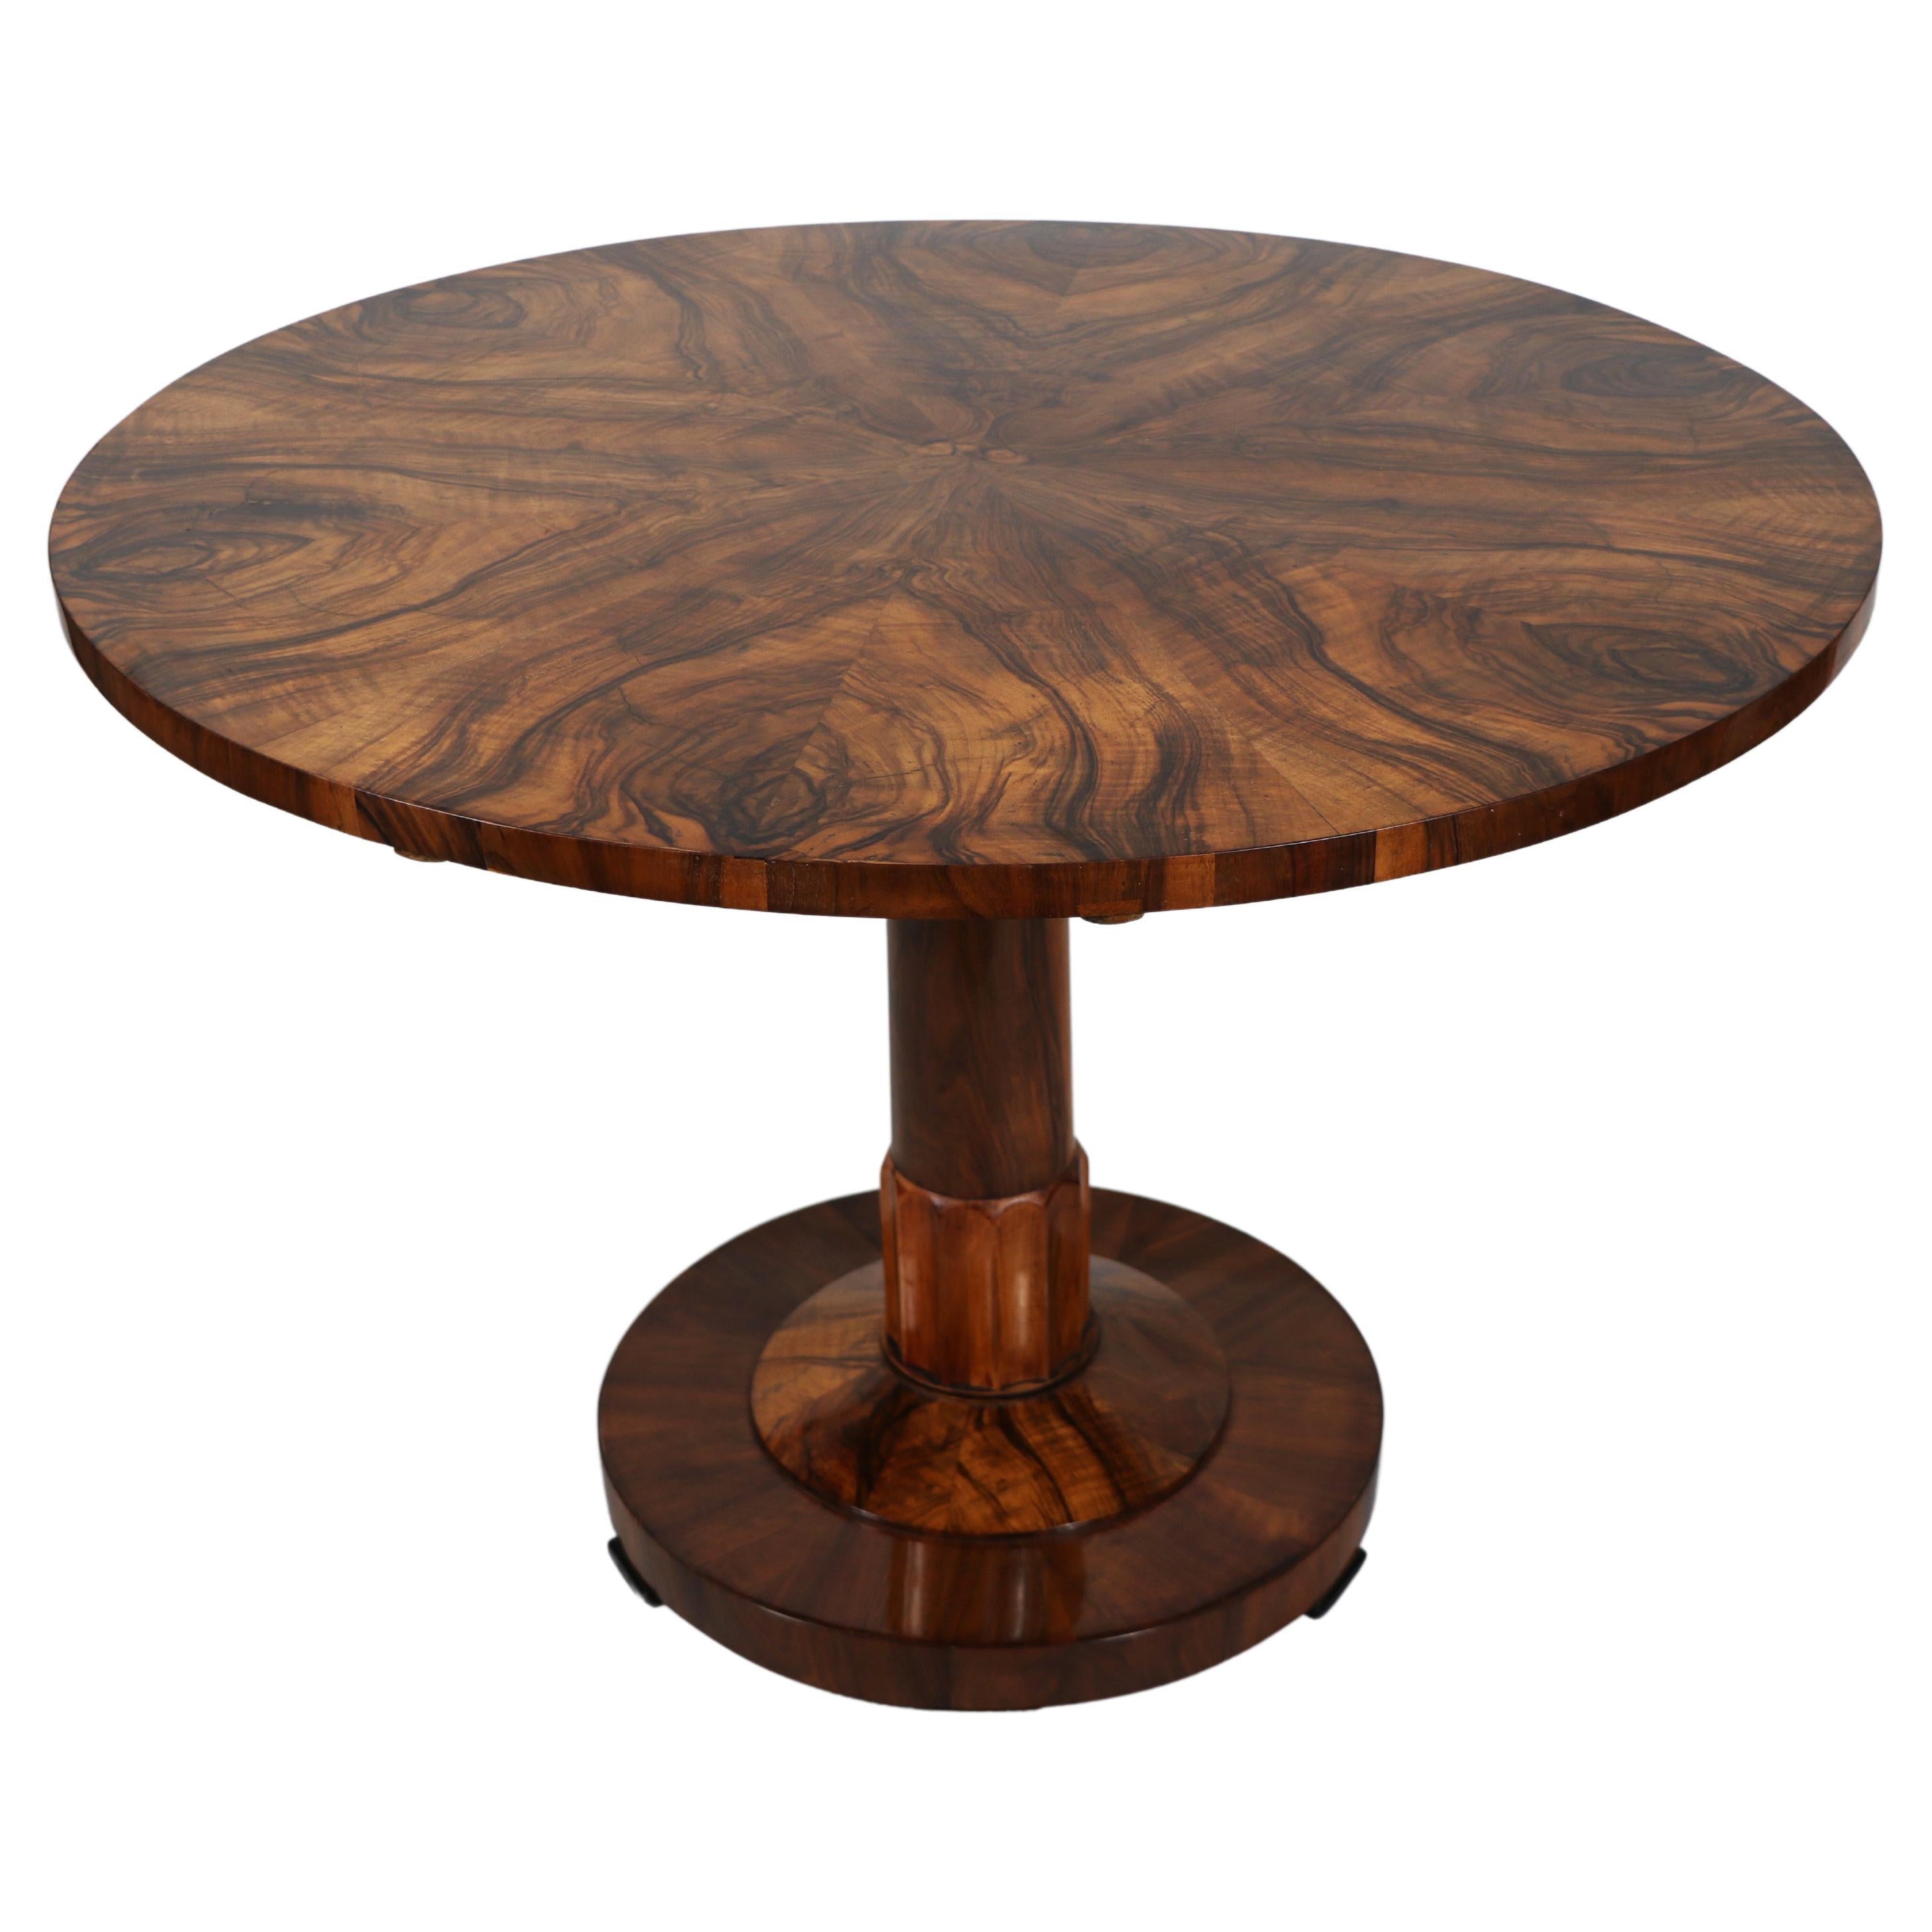 Hello,
This exceptional Biedermeier walnut table was made in Vienna circa 1825.

Viennese Biedermeier pieces are distinguished by their sophisticated proportions, rare and refined design, excellent craftsmanship and continue to have a great